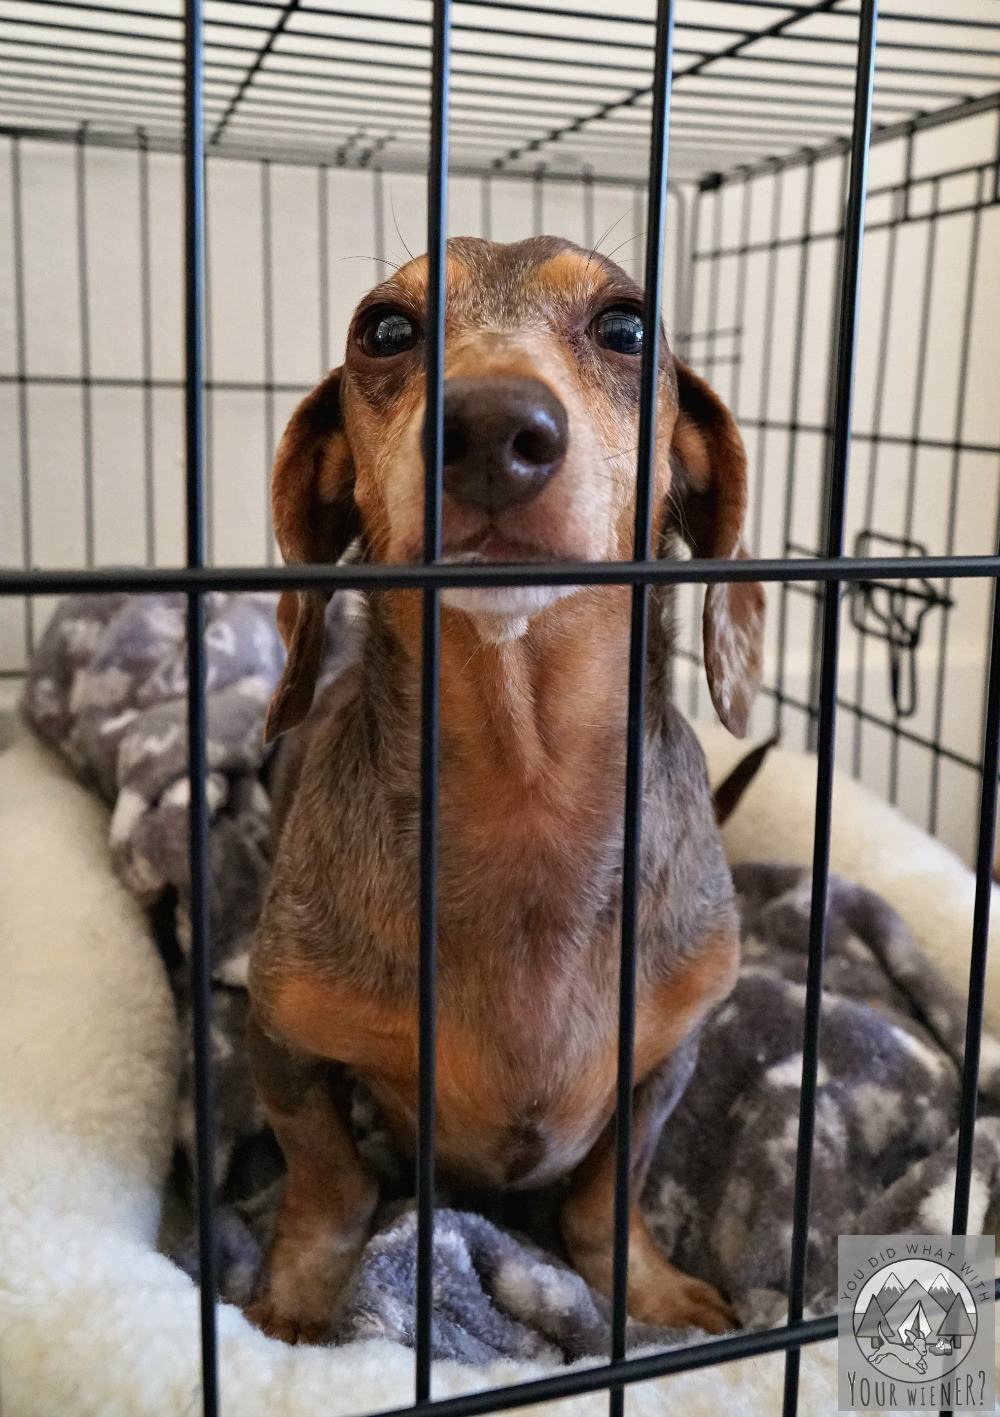 Gretel the Dachshund not so happy in her dog crate